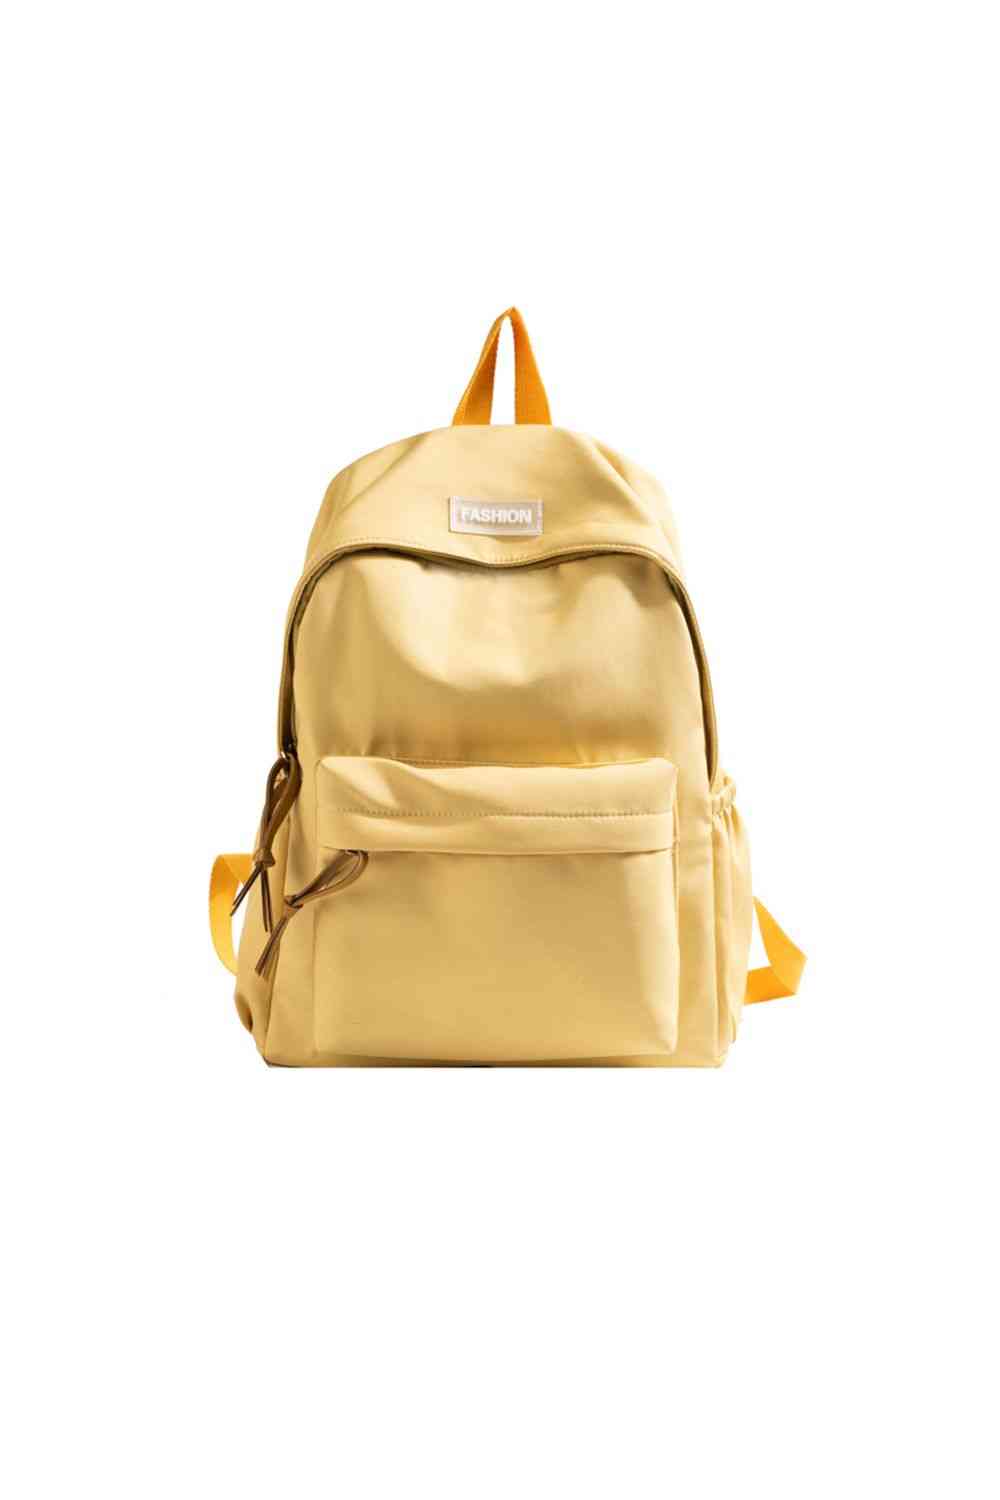 Adored FASHION Polyester Backpack Pastel Yellow One Size